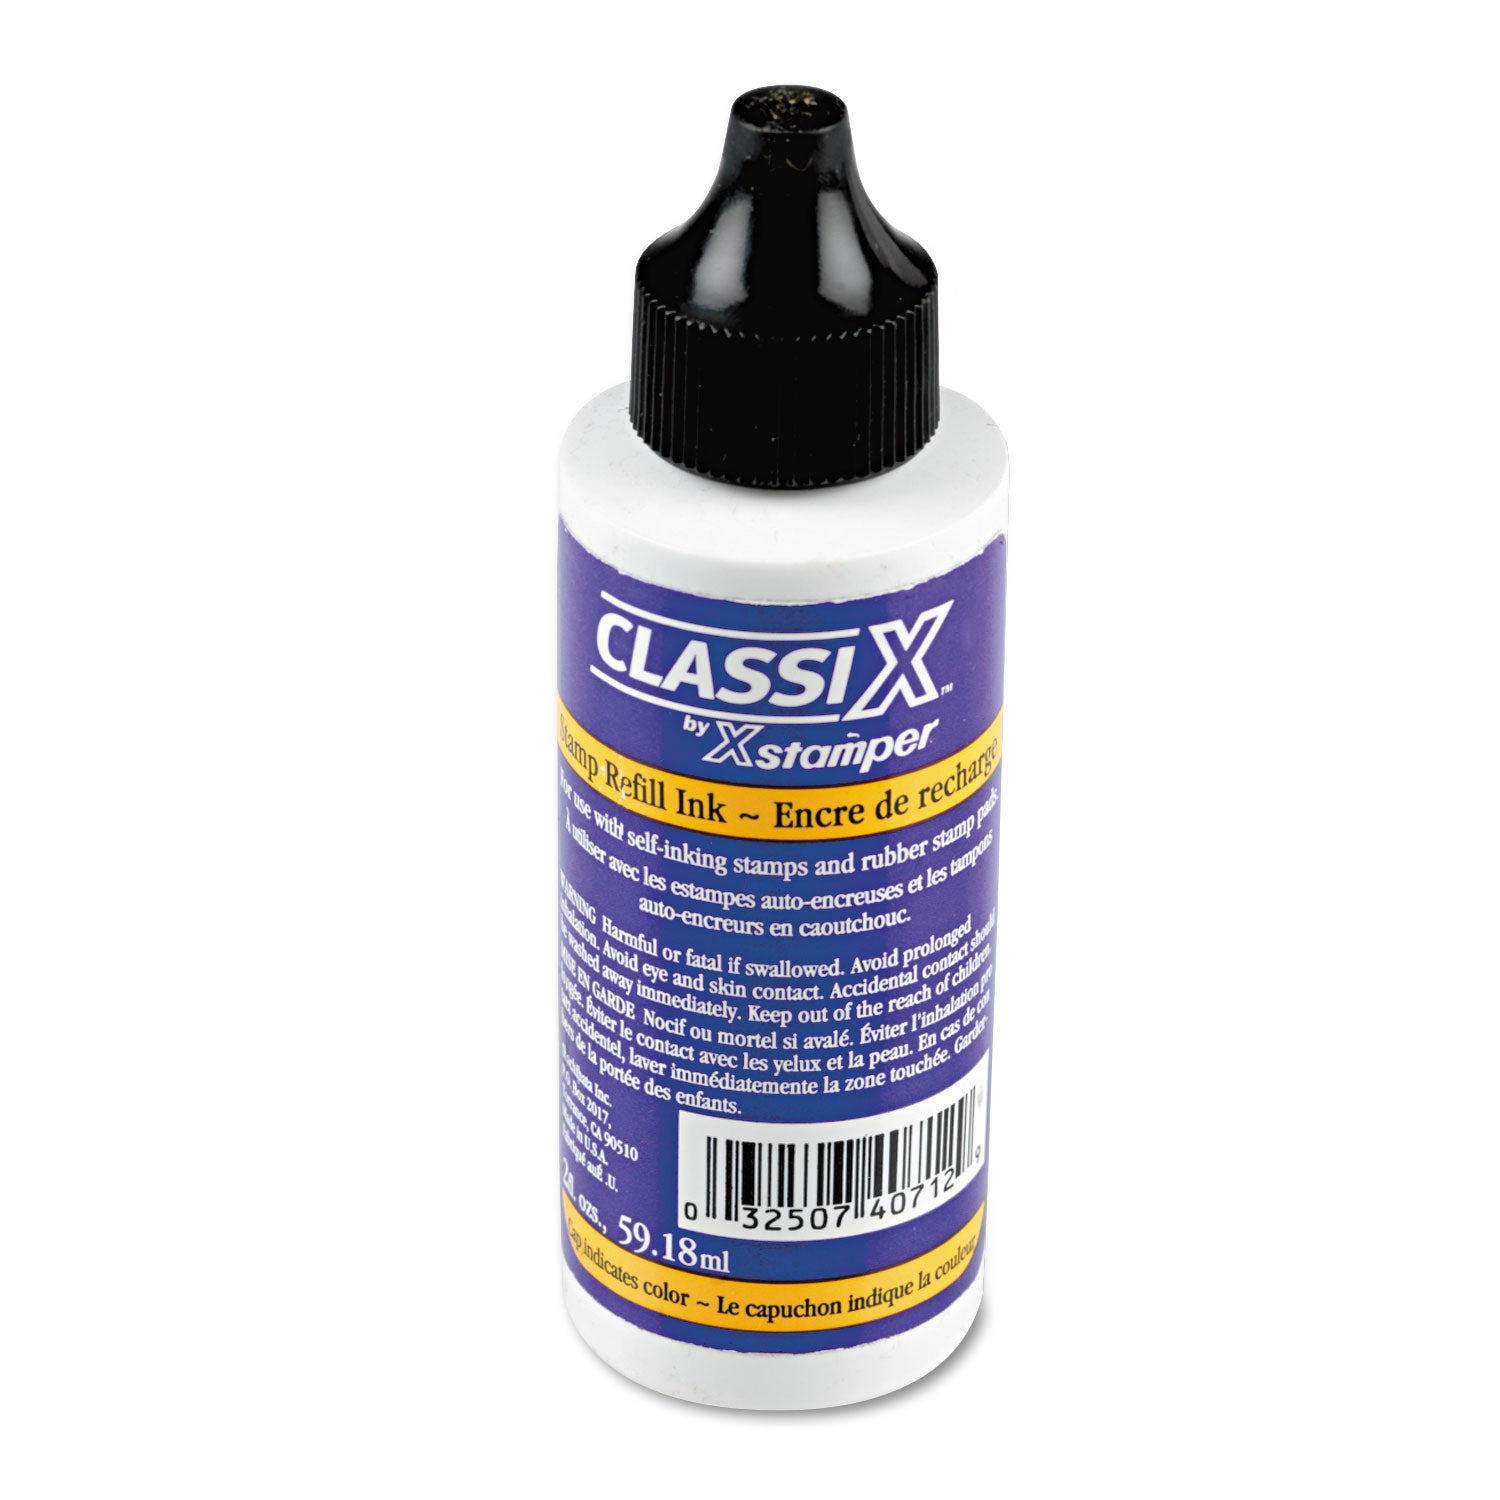 Refill Ink for Classix Stamps, 2 oz Bottle, Black - 